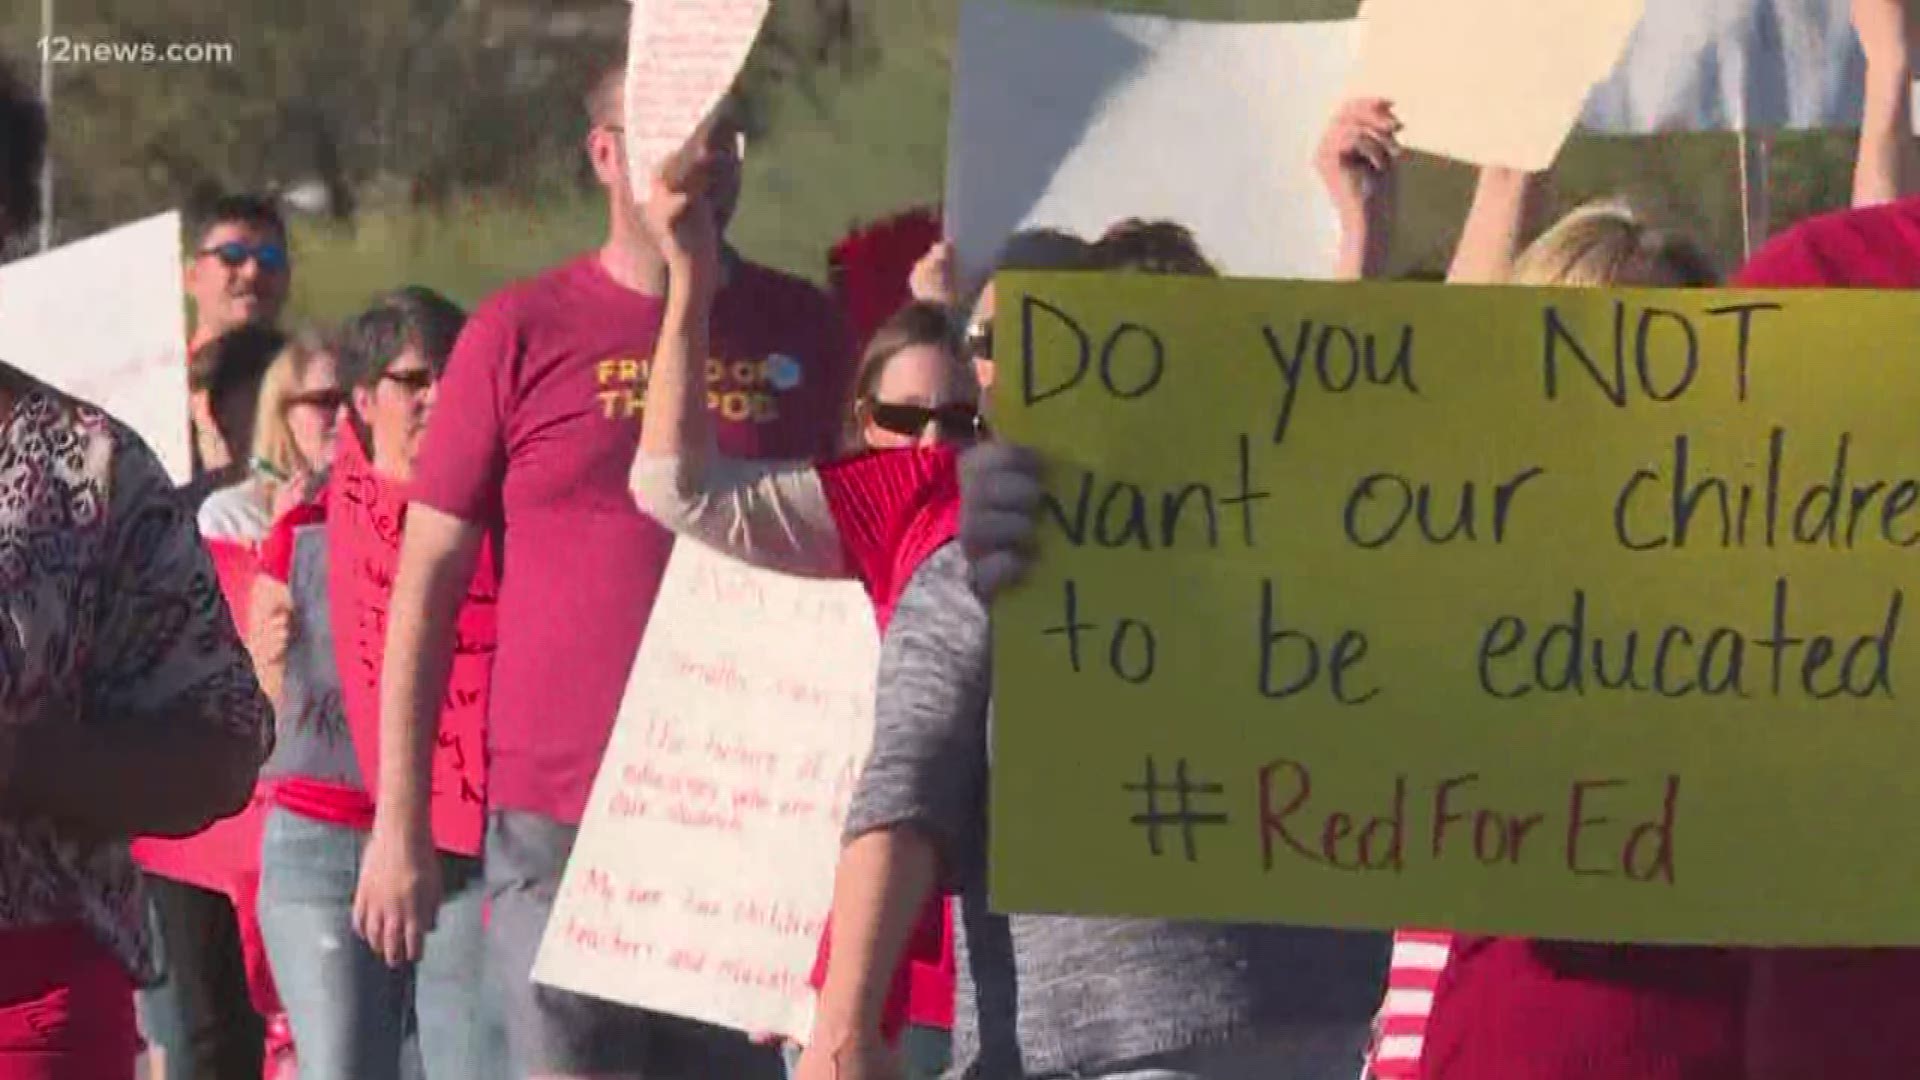 Teachers have told Gov. Doug Ducey that they do not agree with his plan and would prefer to sit down face-to-face to figure something else out.